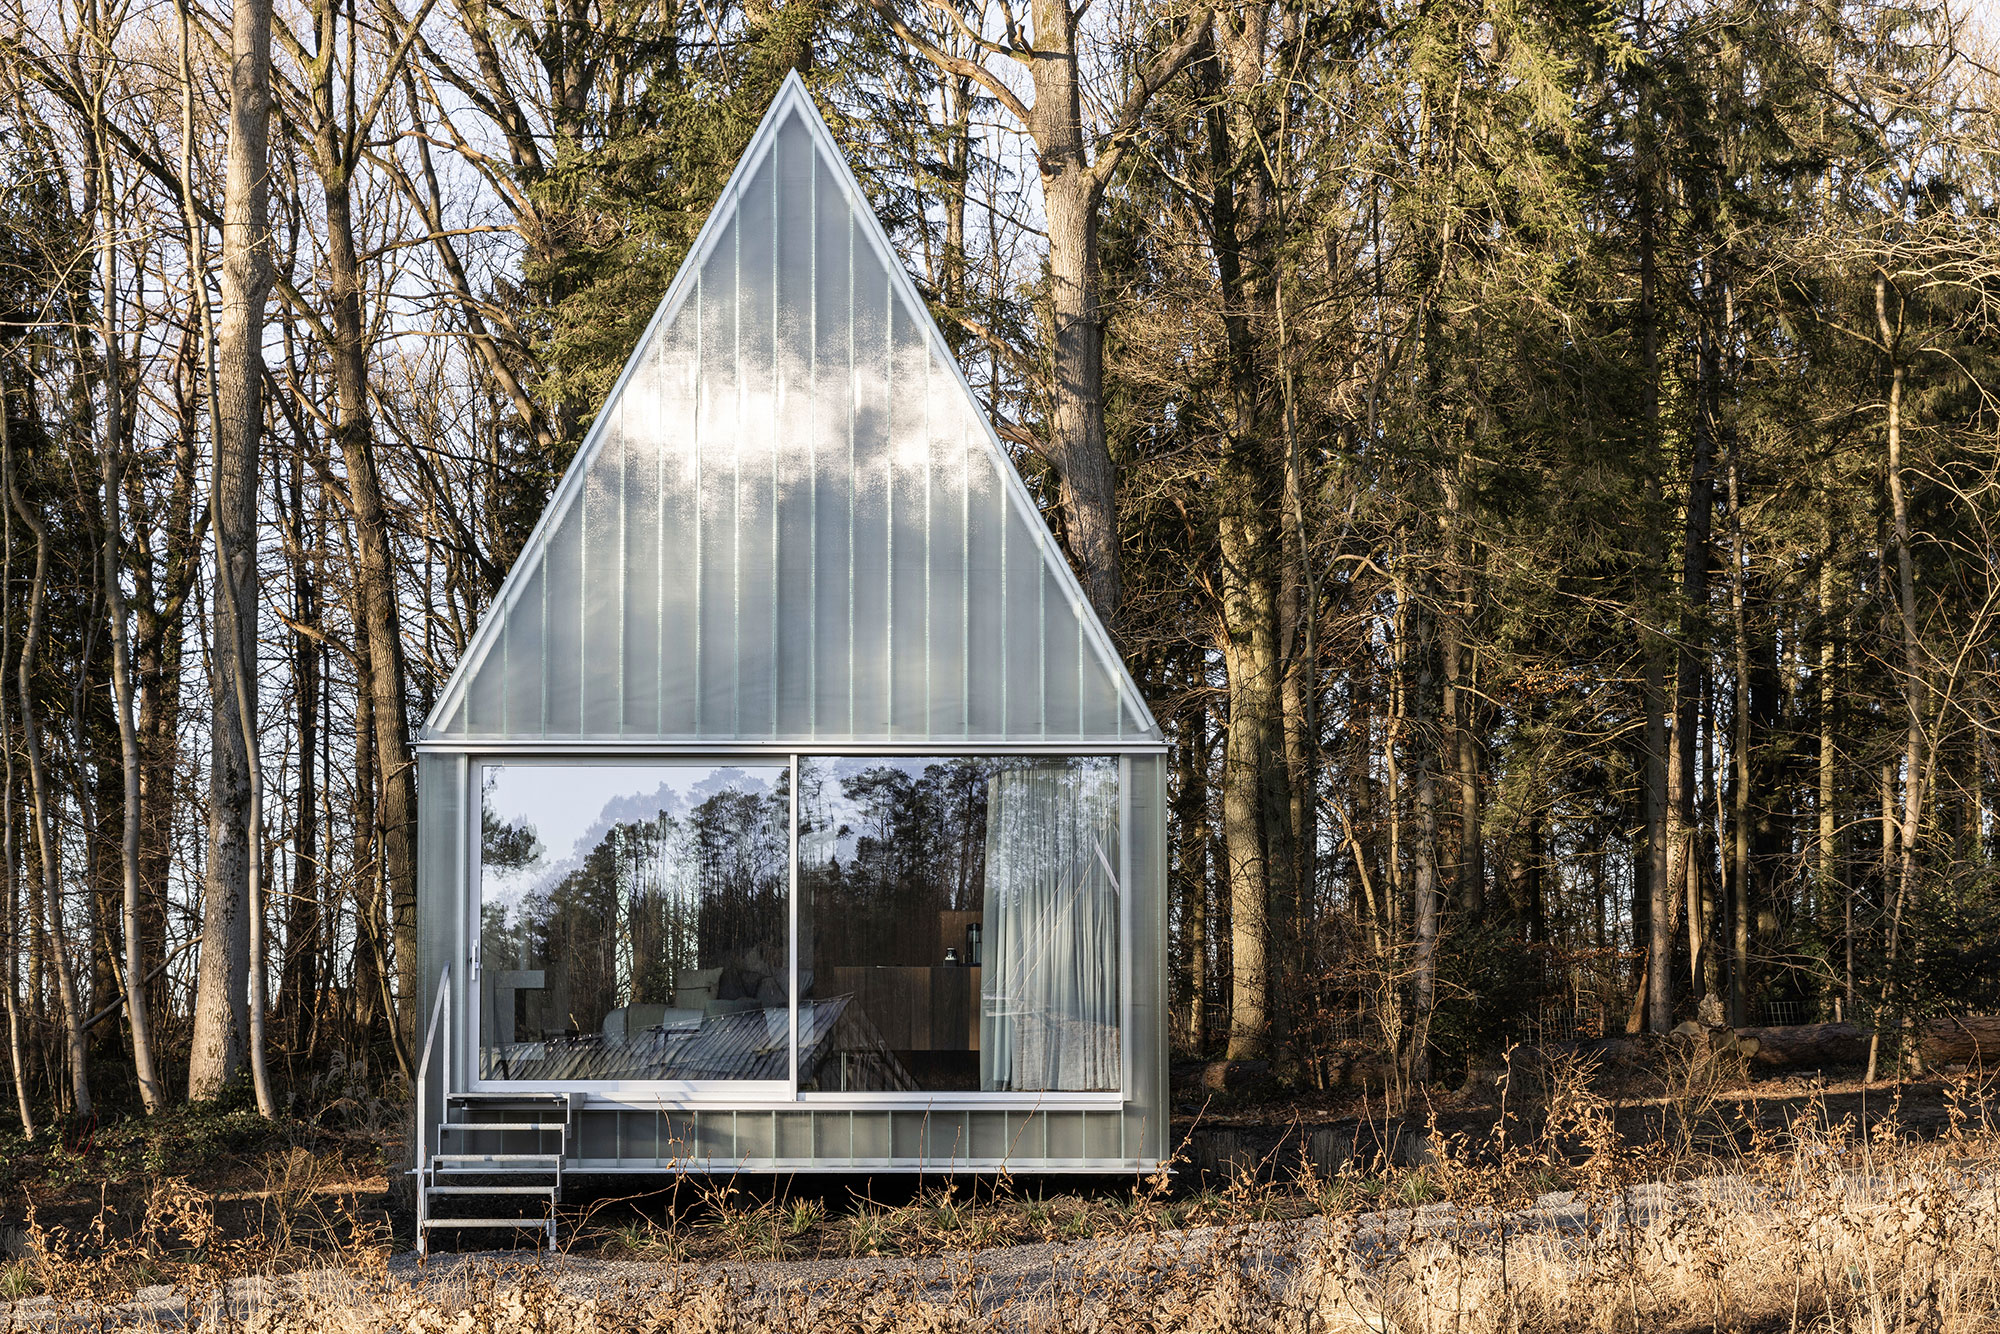 A frame cabin made of glass